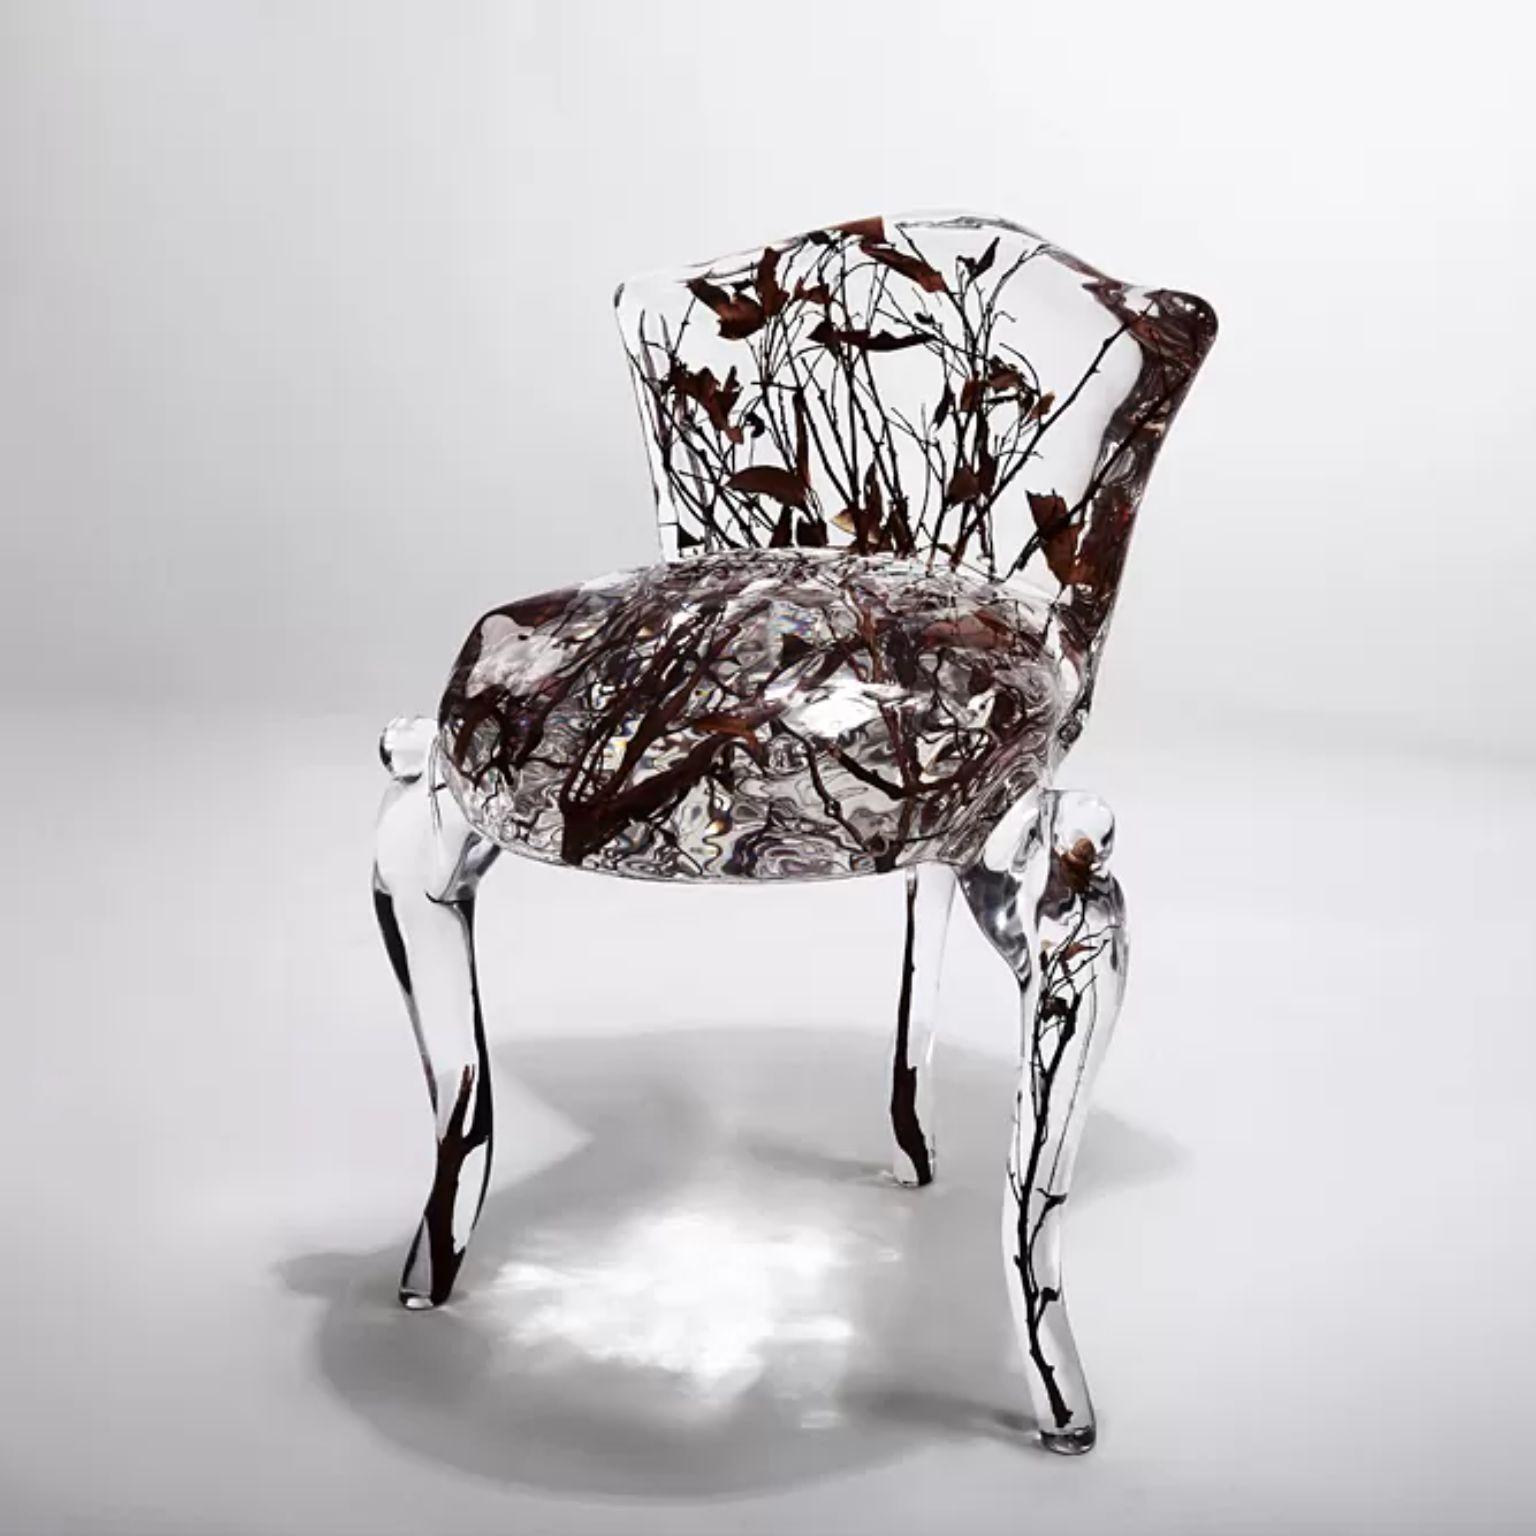 Crystal Tufted Armchair by Dainte
Dimensions: D 50 x W 47 x H 66 cm.
Materials: Crystal. 

Designed to catch the eye, this chair is so much more than impressive. The fine, clear crystal mixed with acrylic is radiant as it enchases the natural wooden